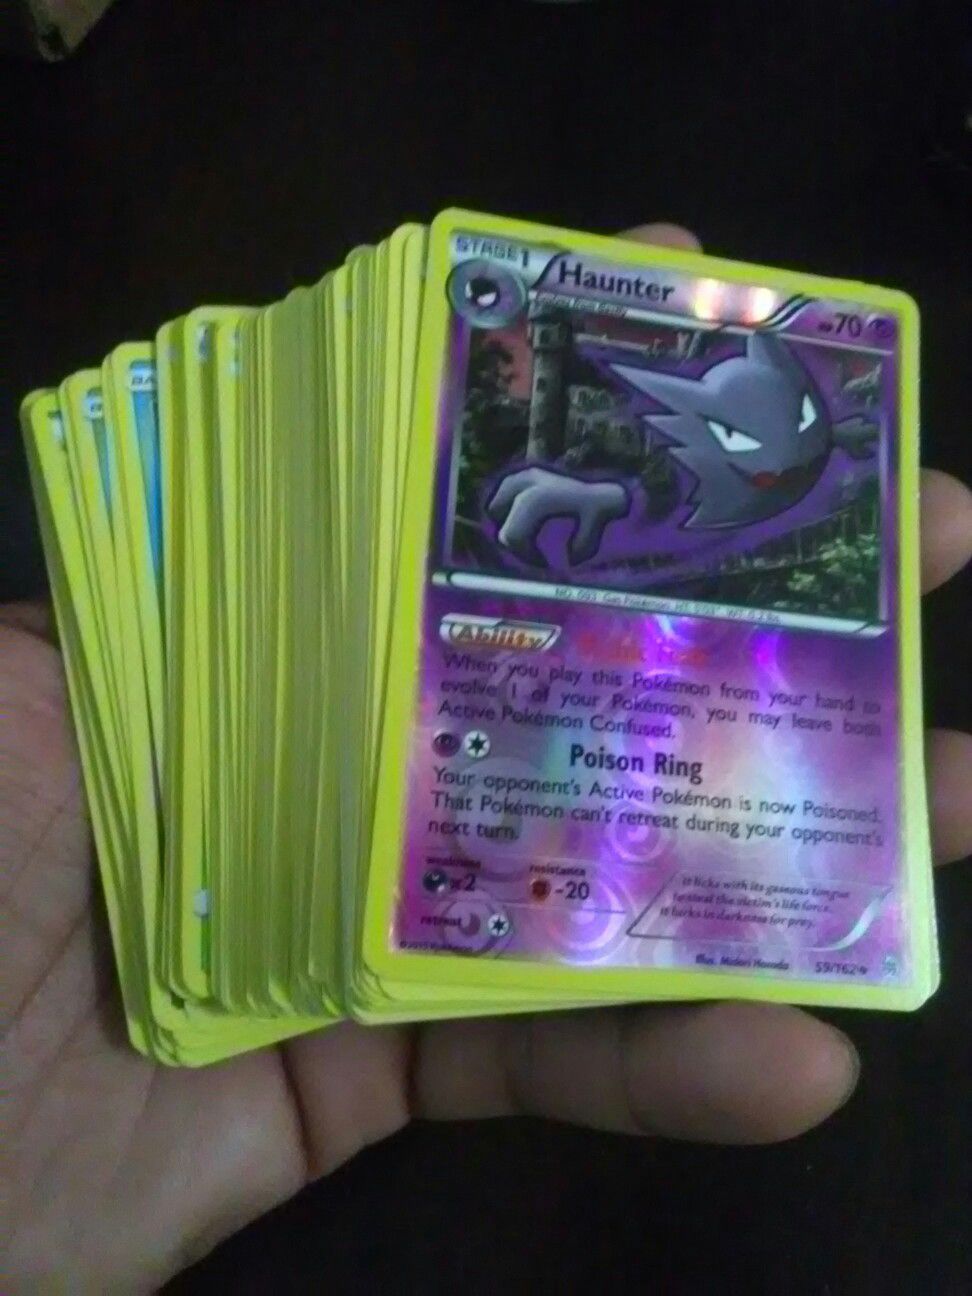 Bulk deal!! 100 Sorted pokemon card stacks $5 each stack!!! That's a value of 5 cents per card!! Randomly distributed